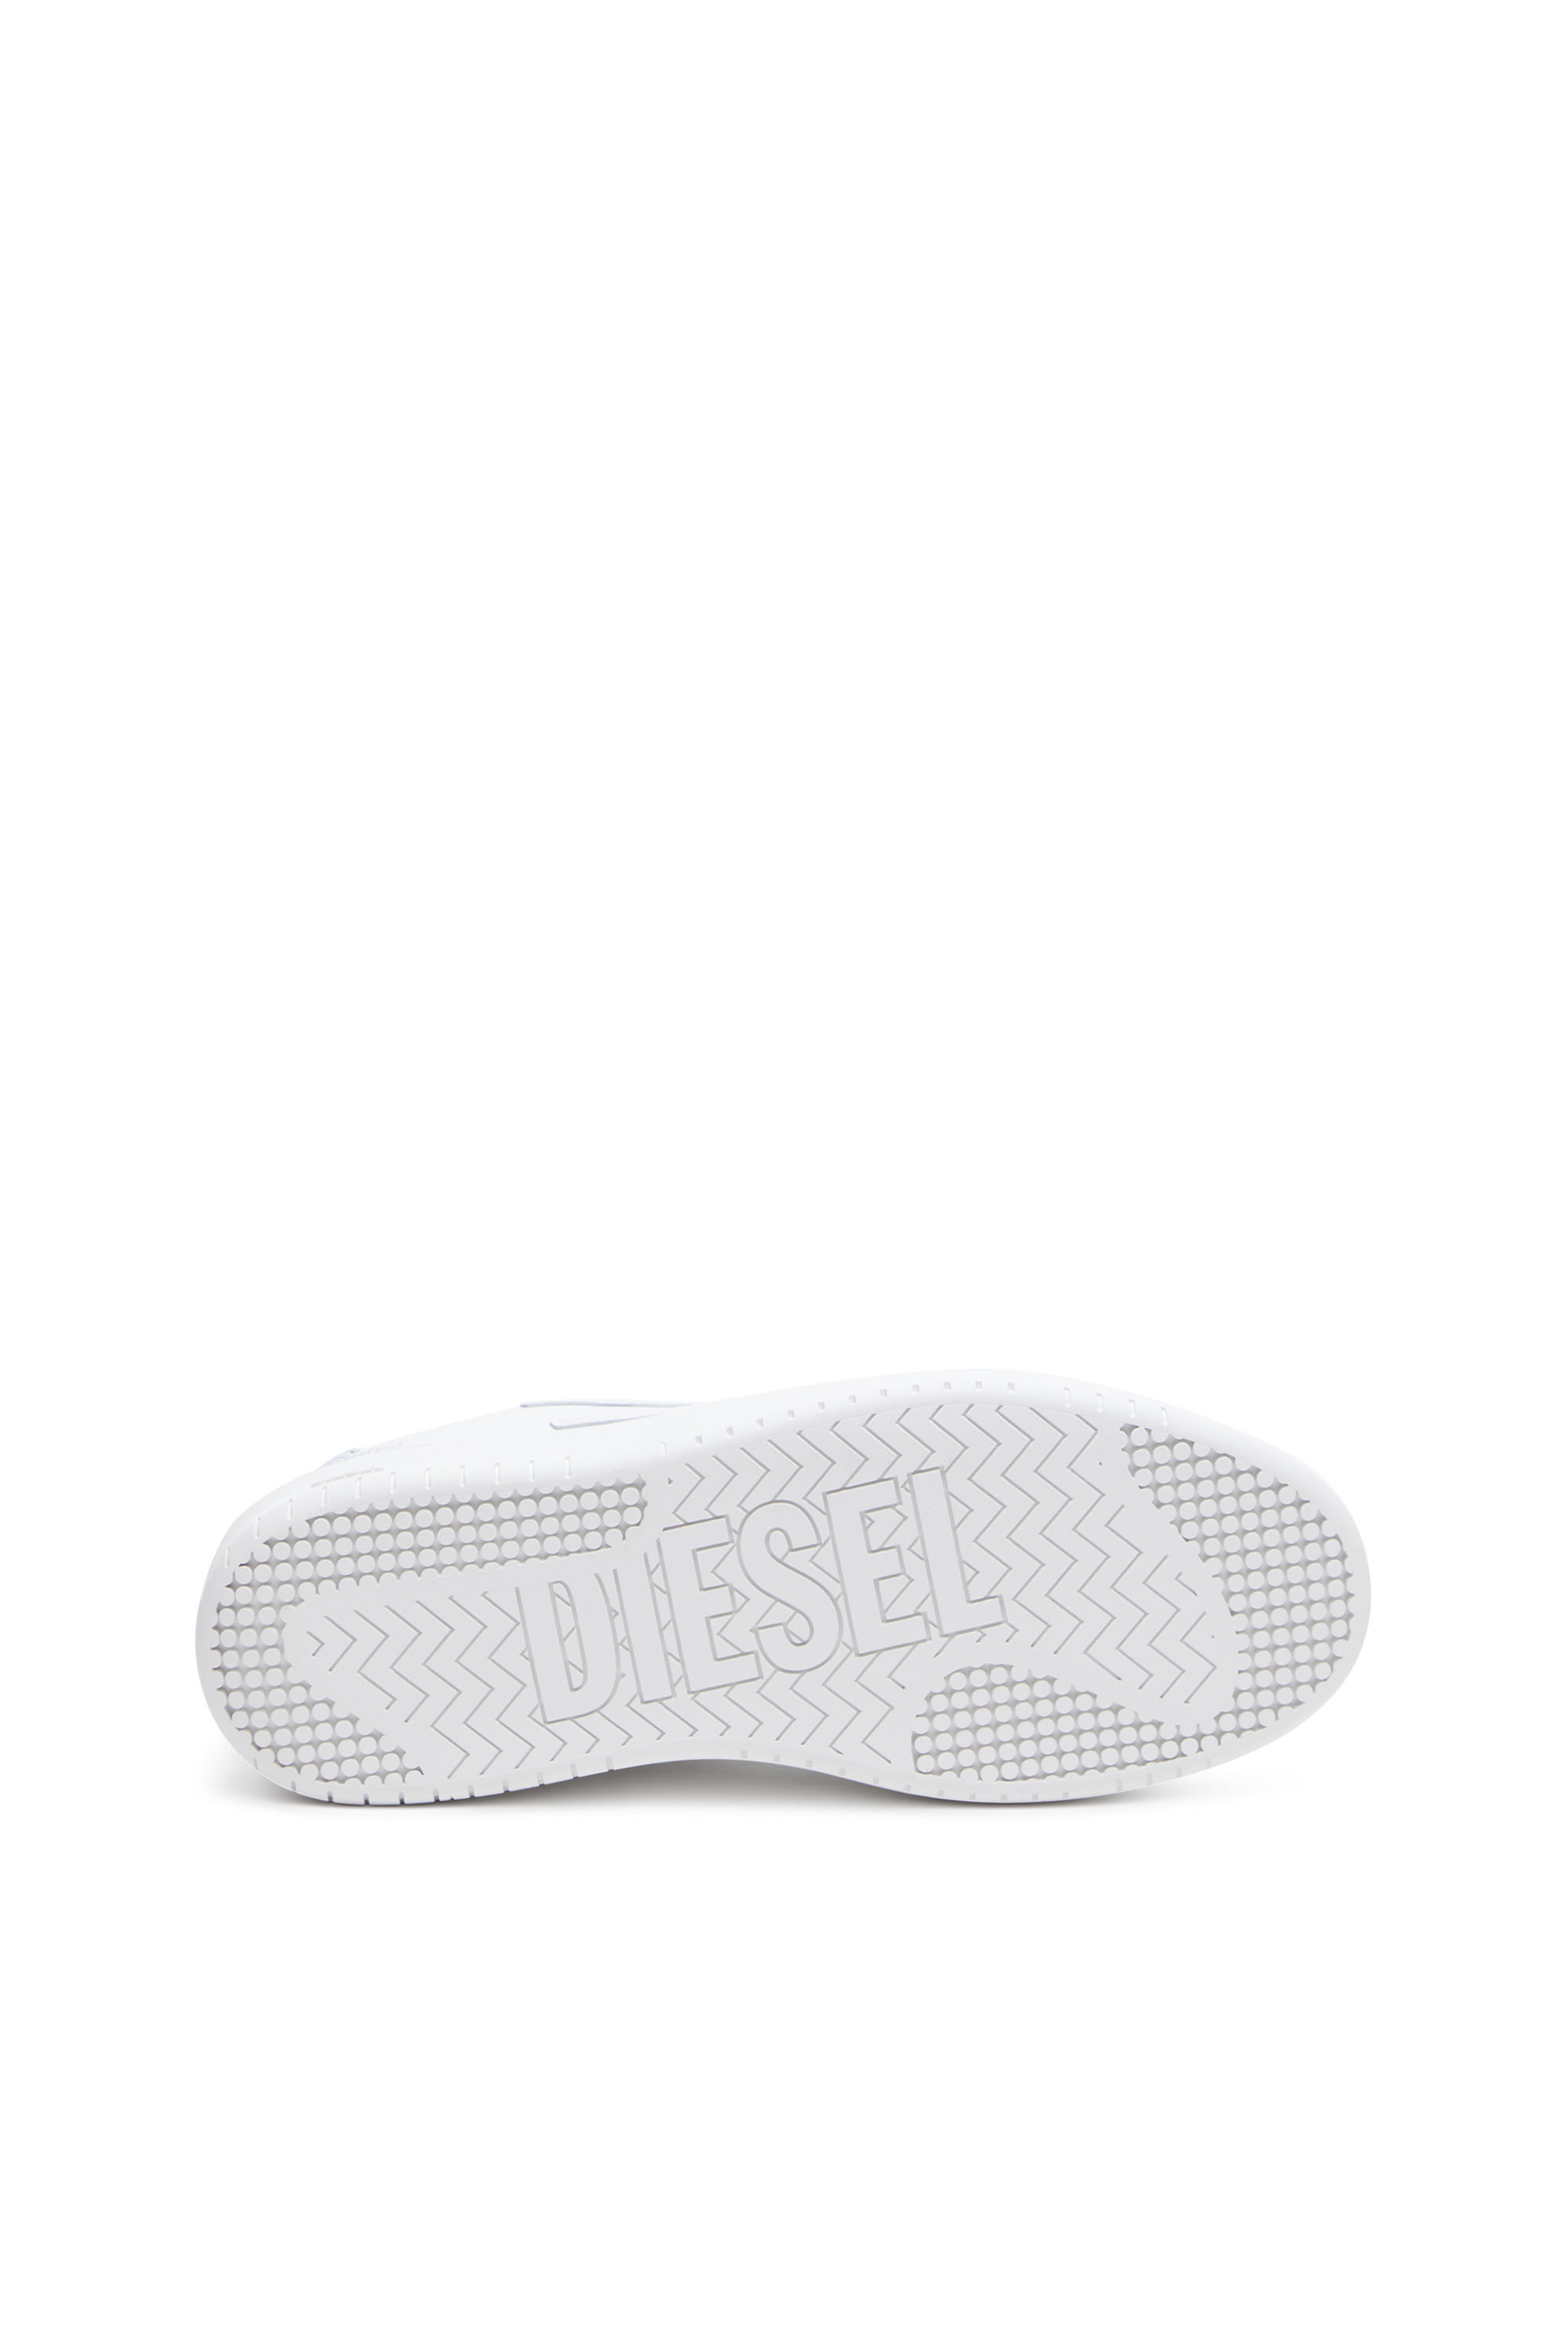 Diesel - S-ATHENE BOLD X, Female S-Athene Bold-Flatform sneakers in leather in White - Image 4